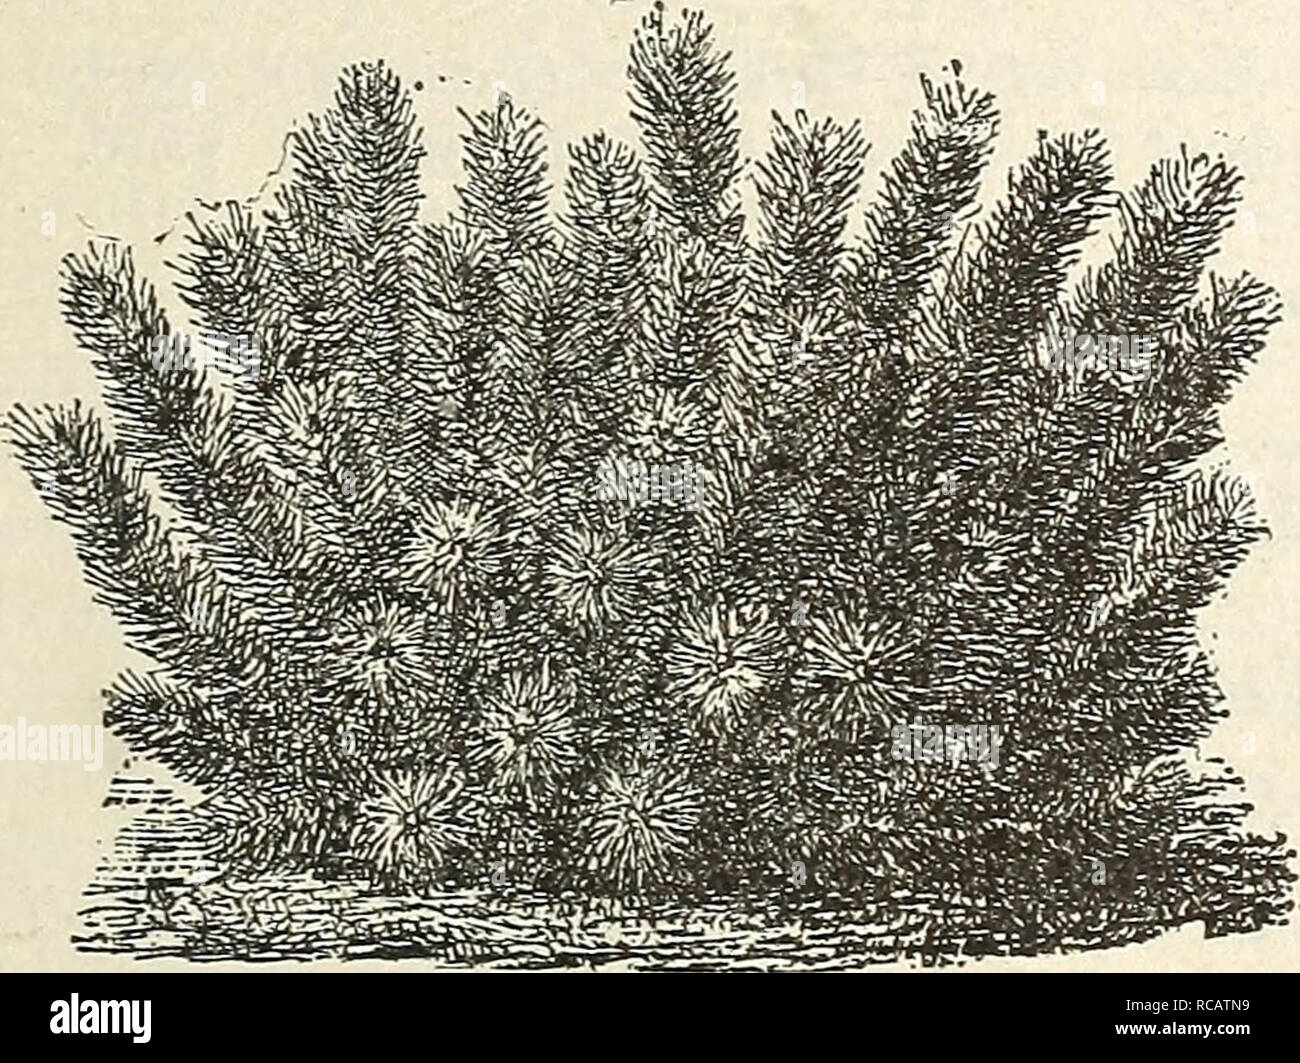 . Ellwanger &amp; Barry's general catalogue : Mount Hope nurseries. AUSTRIAN PINE, Mugho. Dwarf Mugho Pine. D. Its gen- eral form is that of a piue busli. $1.00.. DWARF MUGHO PINE. + var. rotundata. C $1.00. Monspeliensis. Salzmann'S Pine. B. A noble tree; leaves six to seven inches long-. $1.50. Pallasiana. B. A valuable variety. $1.00 to .$2.00. sylvestris. SCOTCH Pine or. Fir. A. Very hardy; valuable for shelter. 50 cents. Section II. Usually with three leaves in a sheath. horizontalis. B. Leaves six to eight inches long. $1.00 to $2.00. tJelfreyi. JEFFREY'S PiNE. A. A noble Pine: hardy. $1 Stock Photo